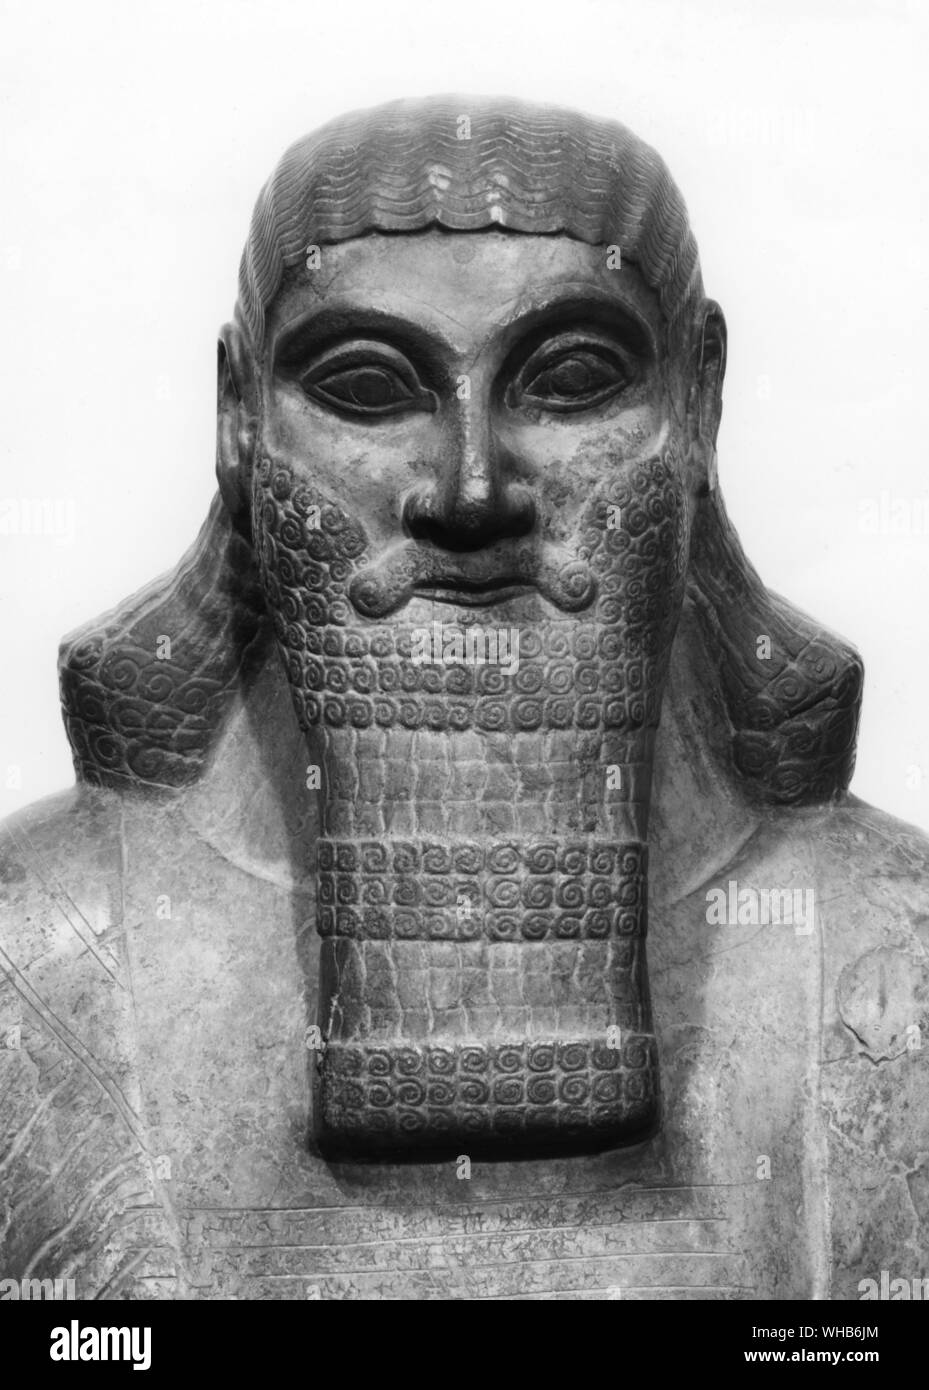 Statue of Ashurnasirpal II (AD 884-859) from Nimrud.. Ashur-nasir-pal II (transliteration Ashshur-nâsir-apli, meaning Ashur is guardian of the heir) was king of Assyria from 884 BC-859 BC.. Nimrud is an ancient Assyrian city located south of Nineveh on the river Tigris.. Stock Photo